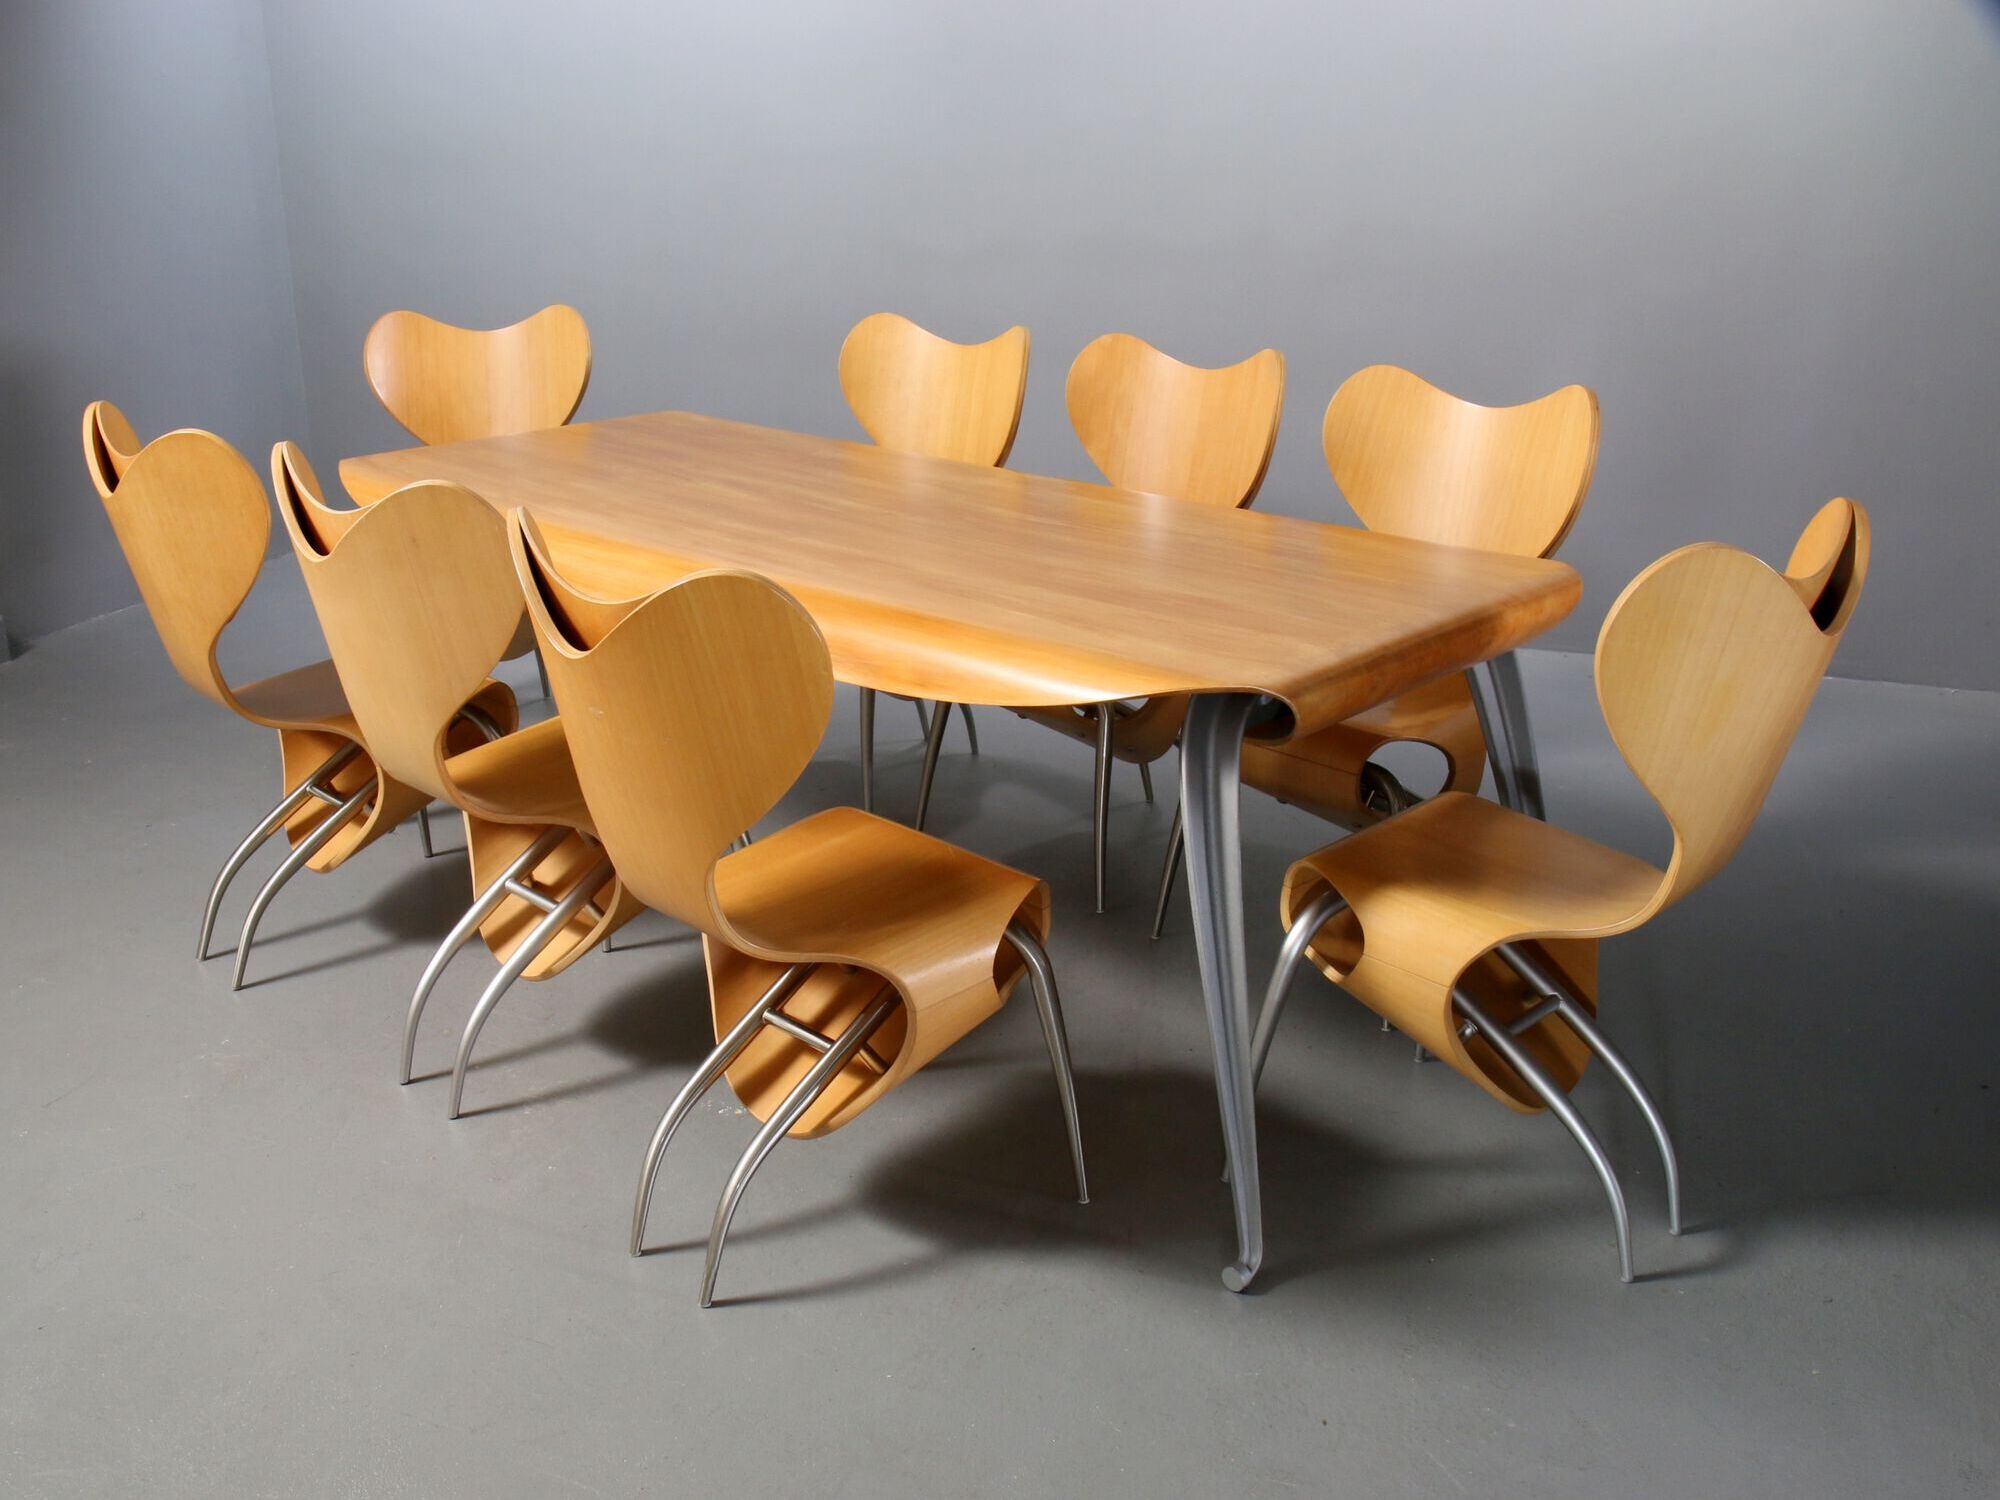 8 Empty Chairs and Fly Ply table in birch with a cast aluminum frame.